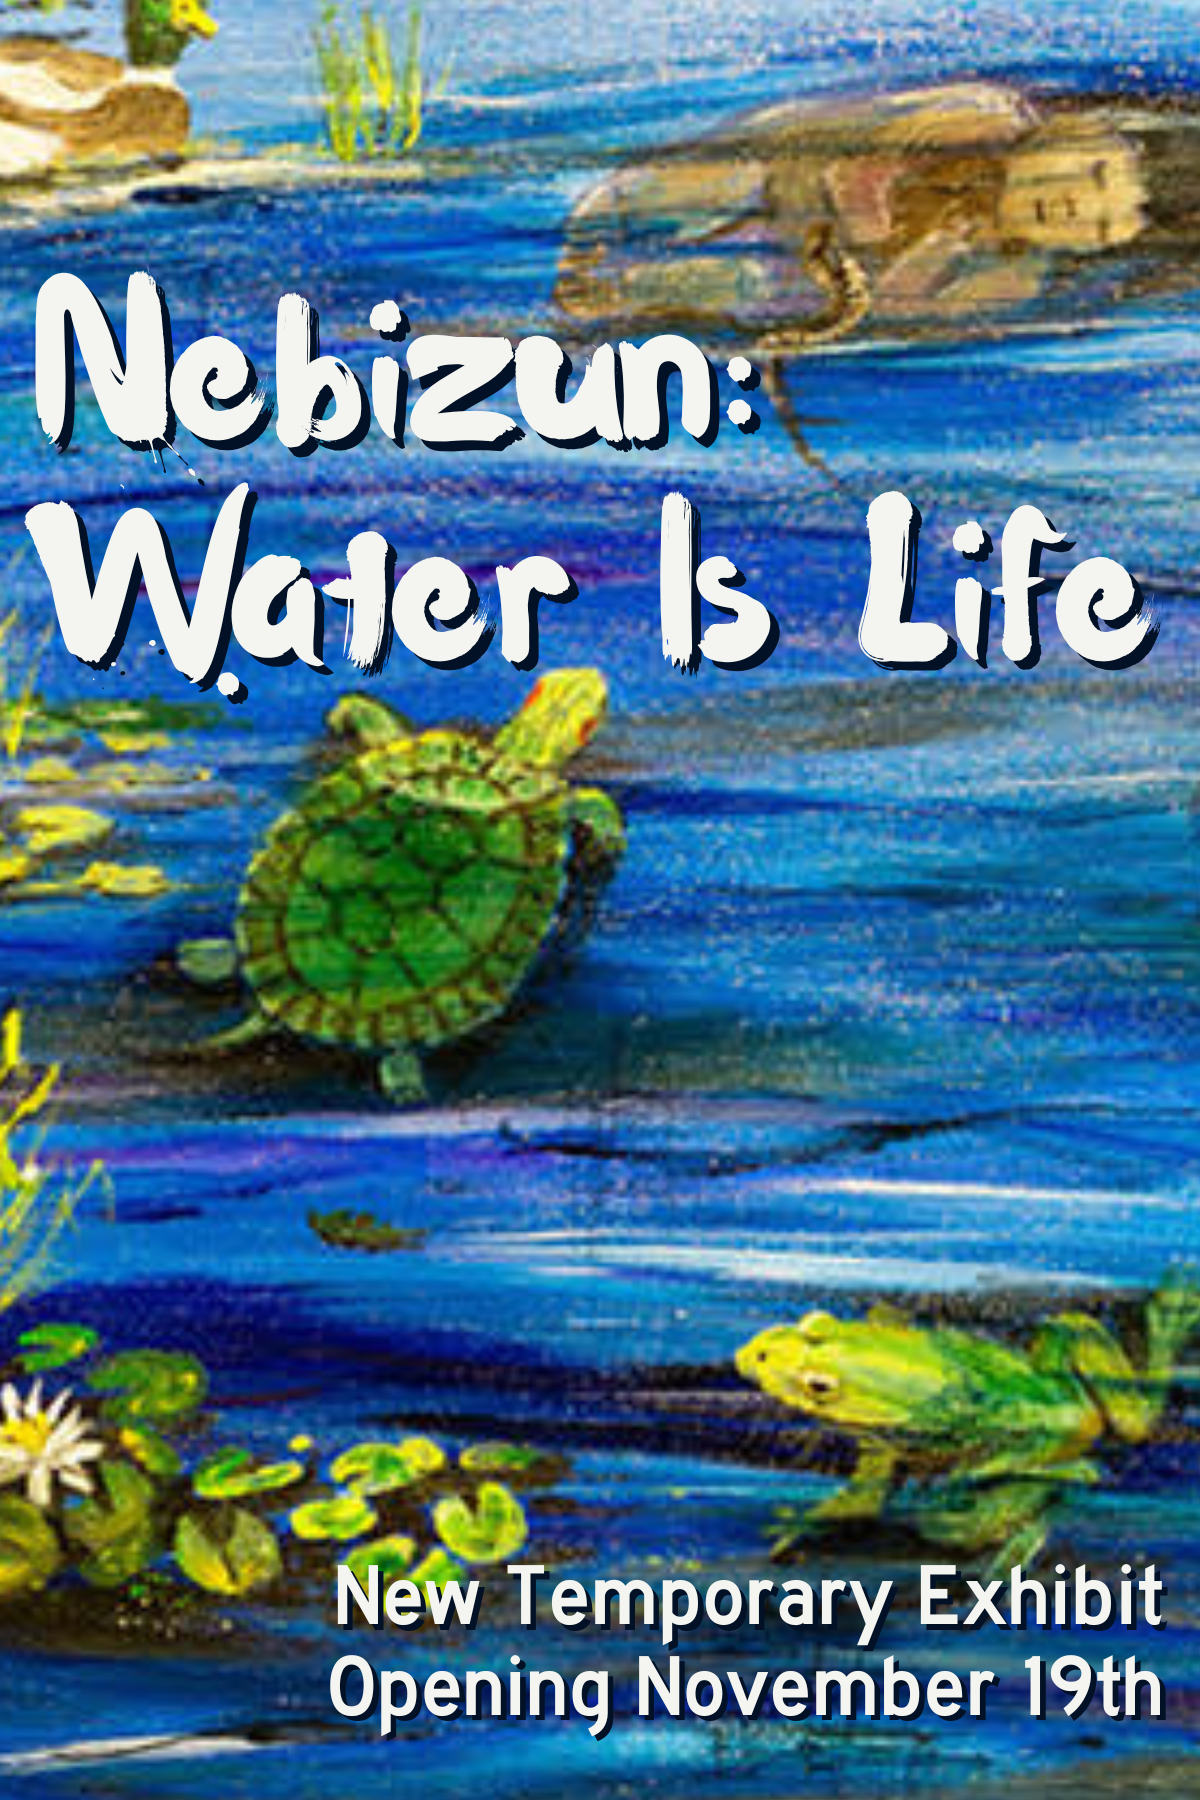 image reads Nebisum Water is Life New Temporary Exhibit Opening November 19th